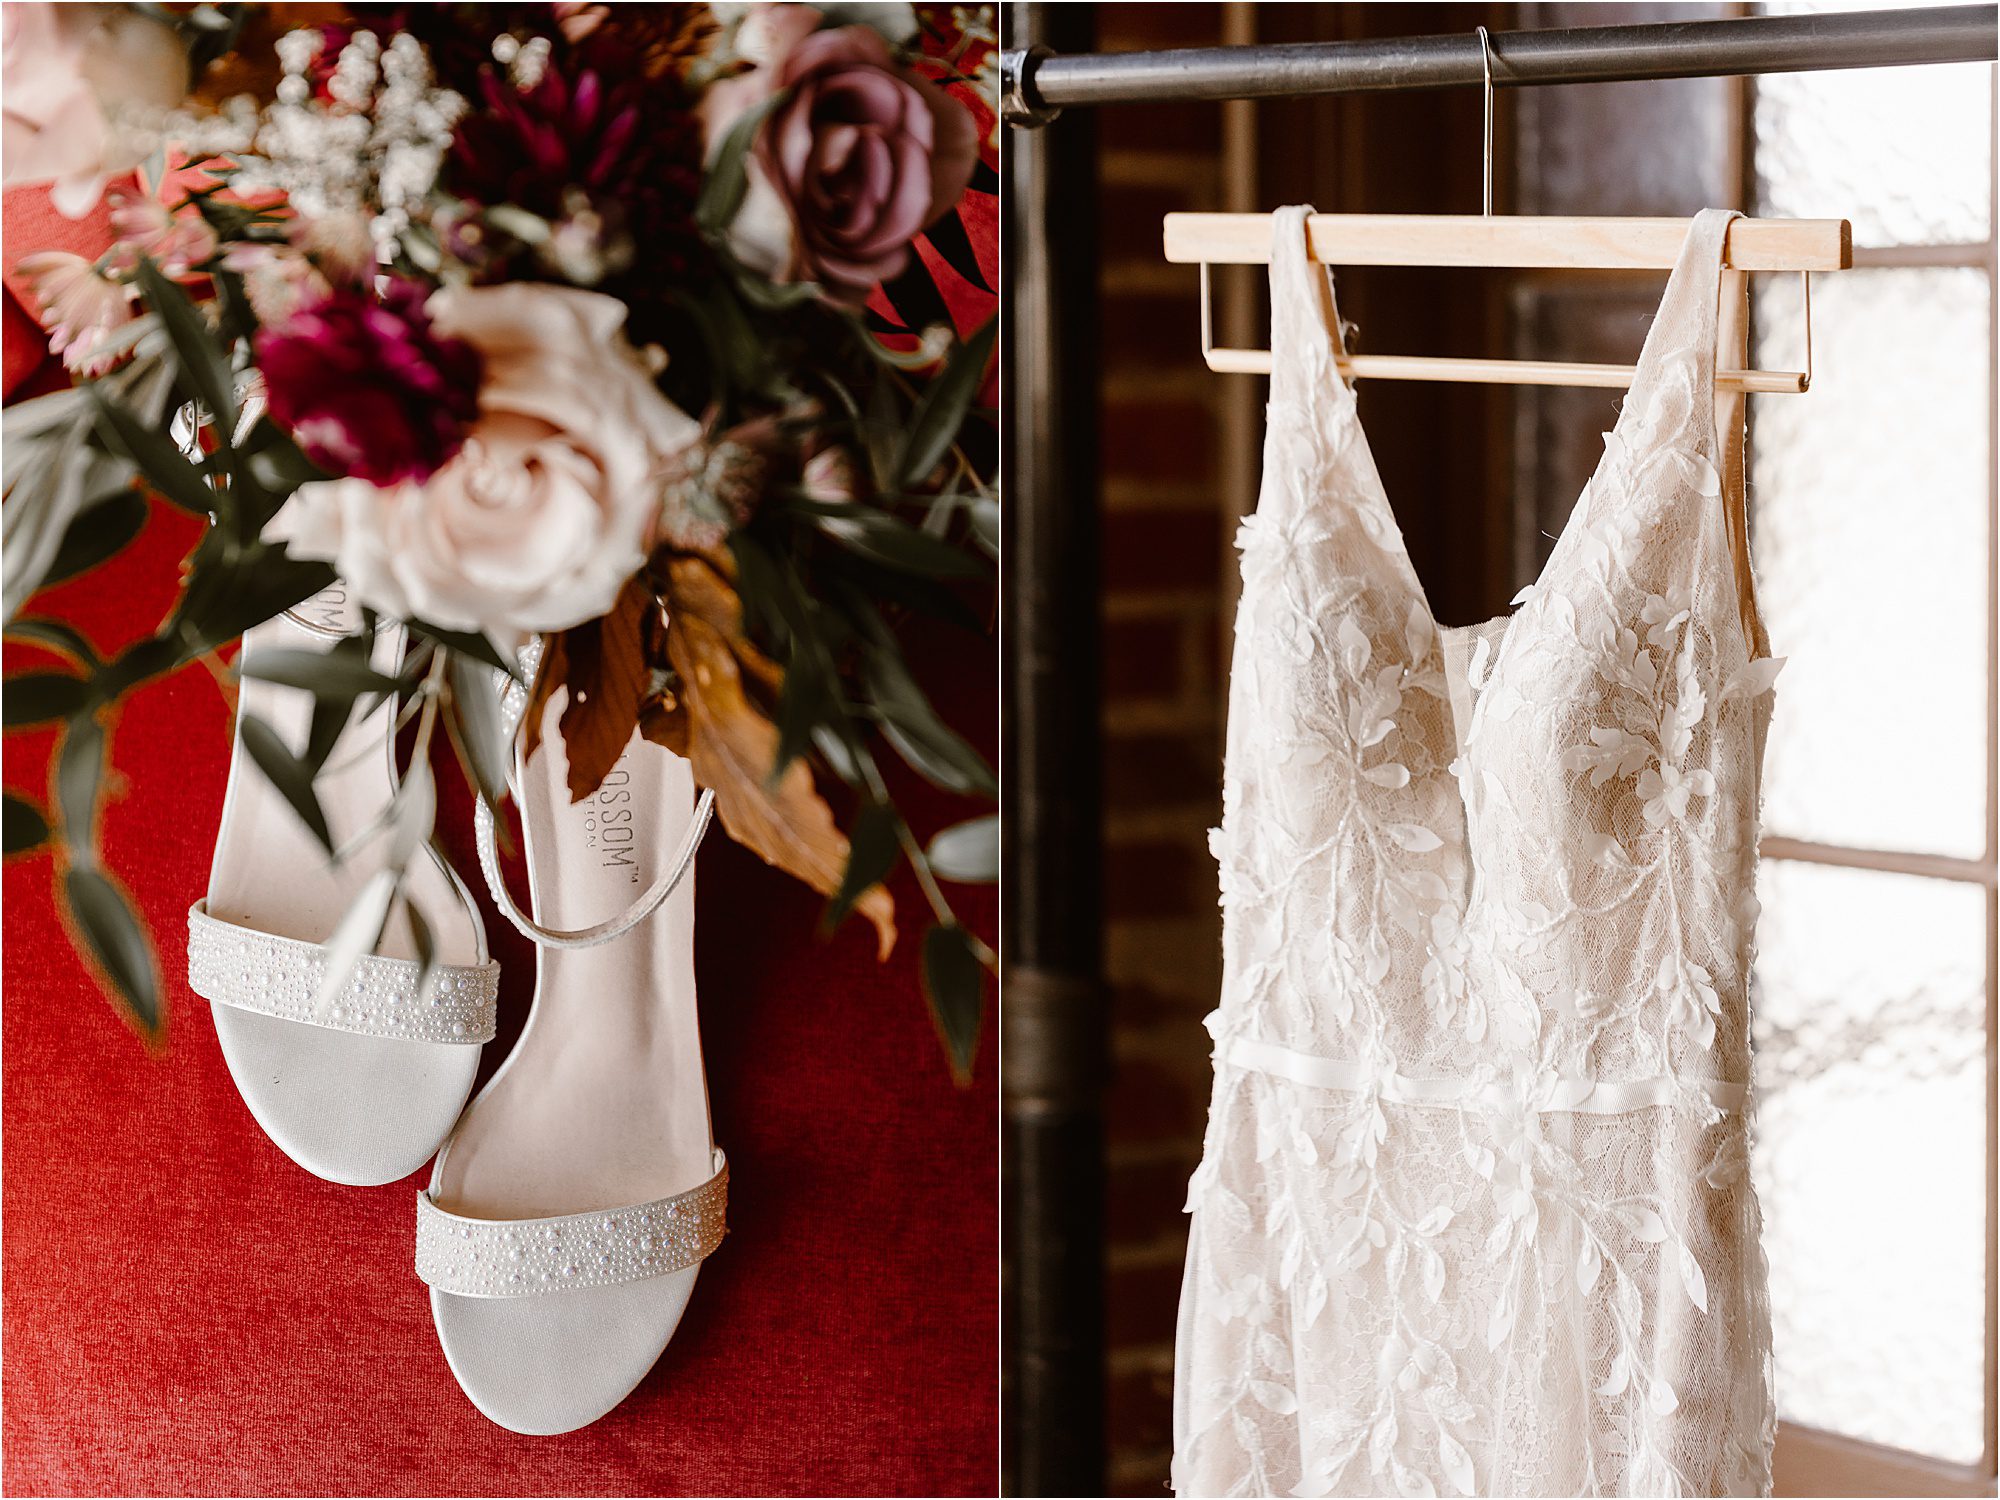 white shoes and white dress hanging on rolling clothing rack